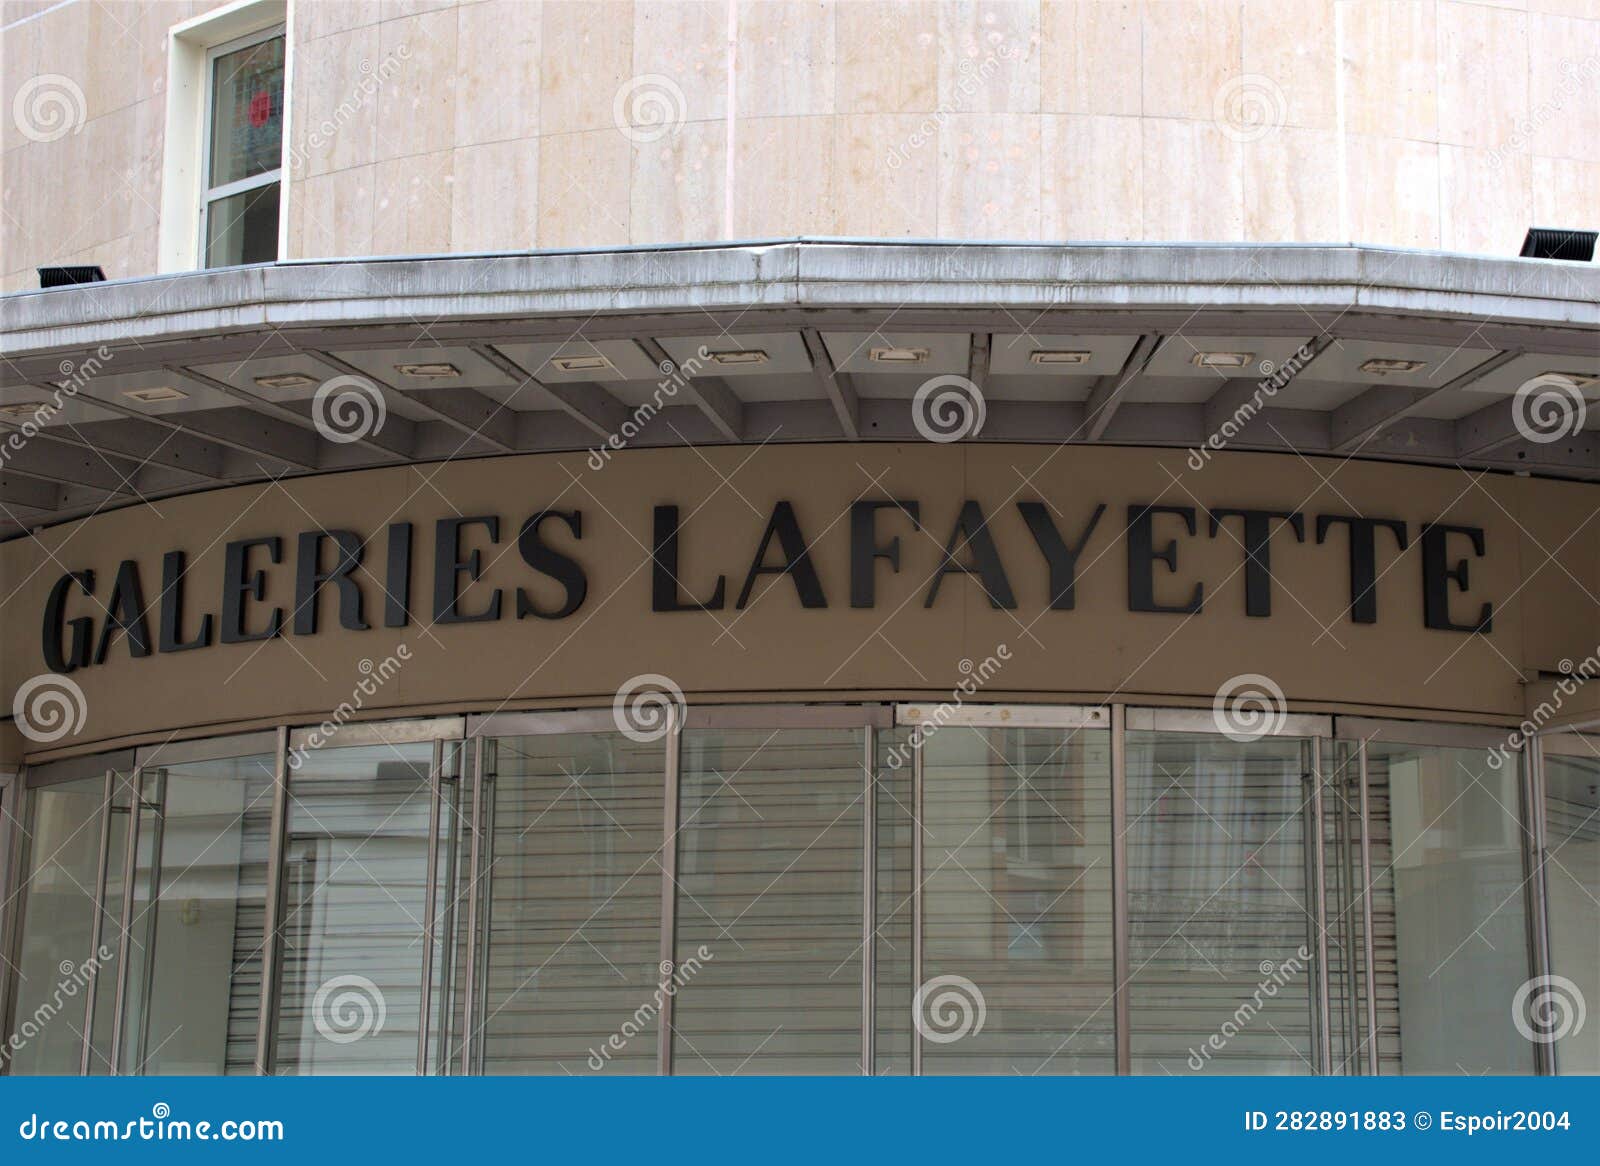 Galeries Lafayette Shop Entrance. Editorial Stock Photo - Image of ...